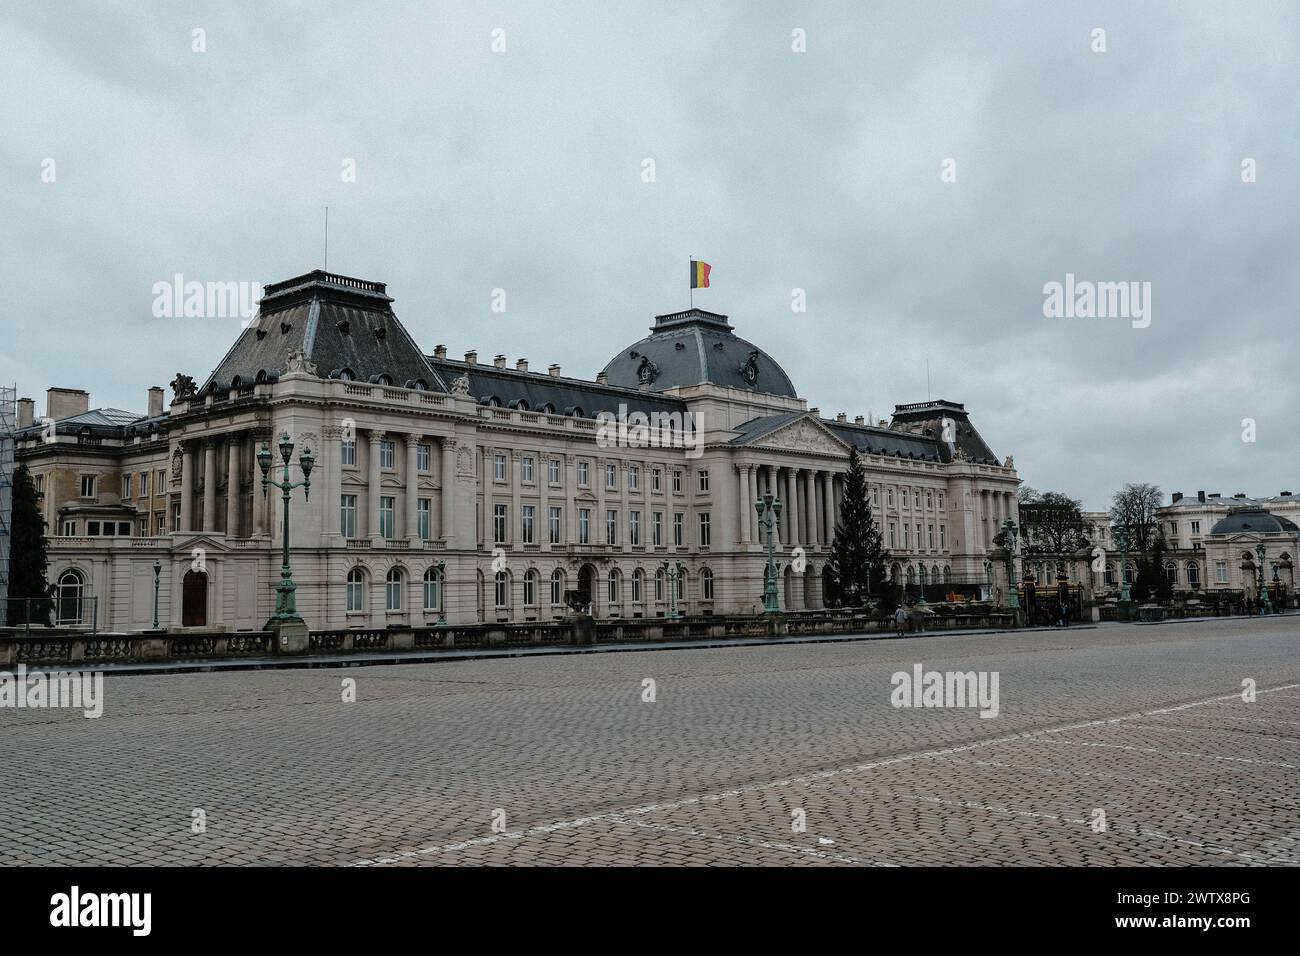 Royal Palace of Brussels - Street View Stock Photo